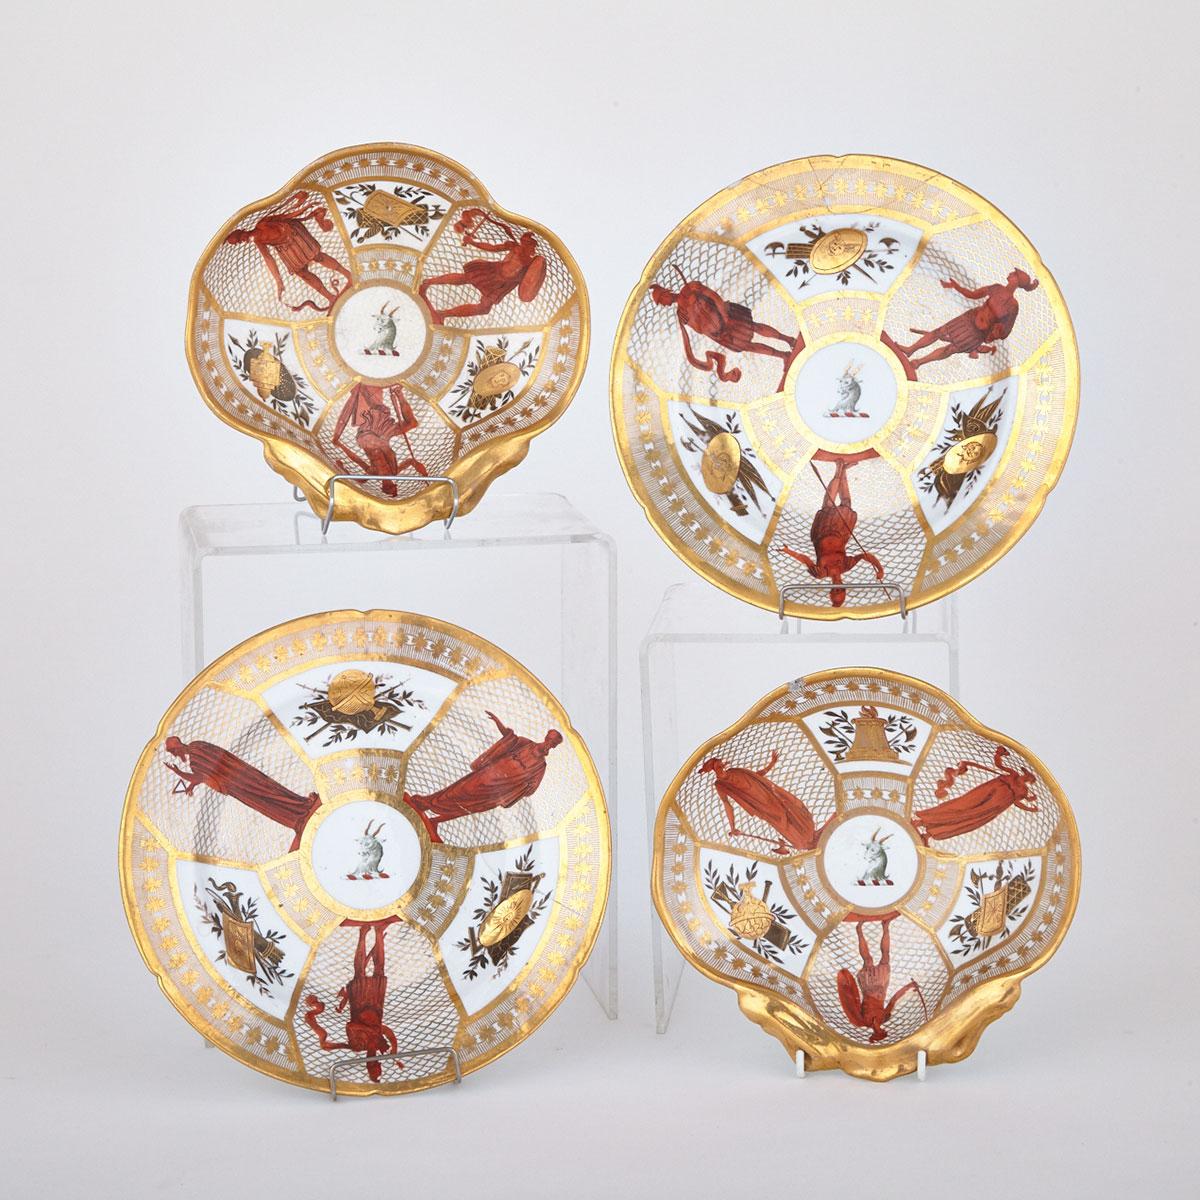 Pair of Coalport Armorial Plates and a Pair of Shell Dishes, c.1805-10